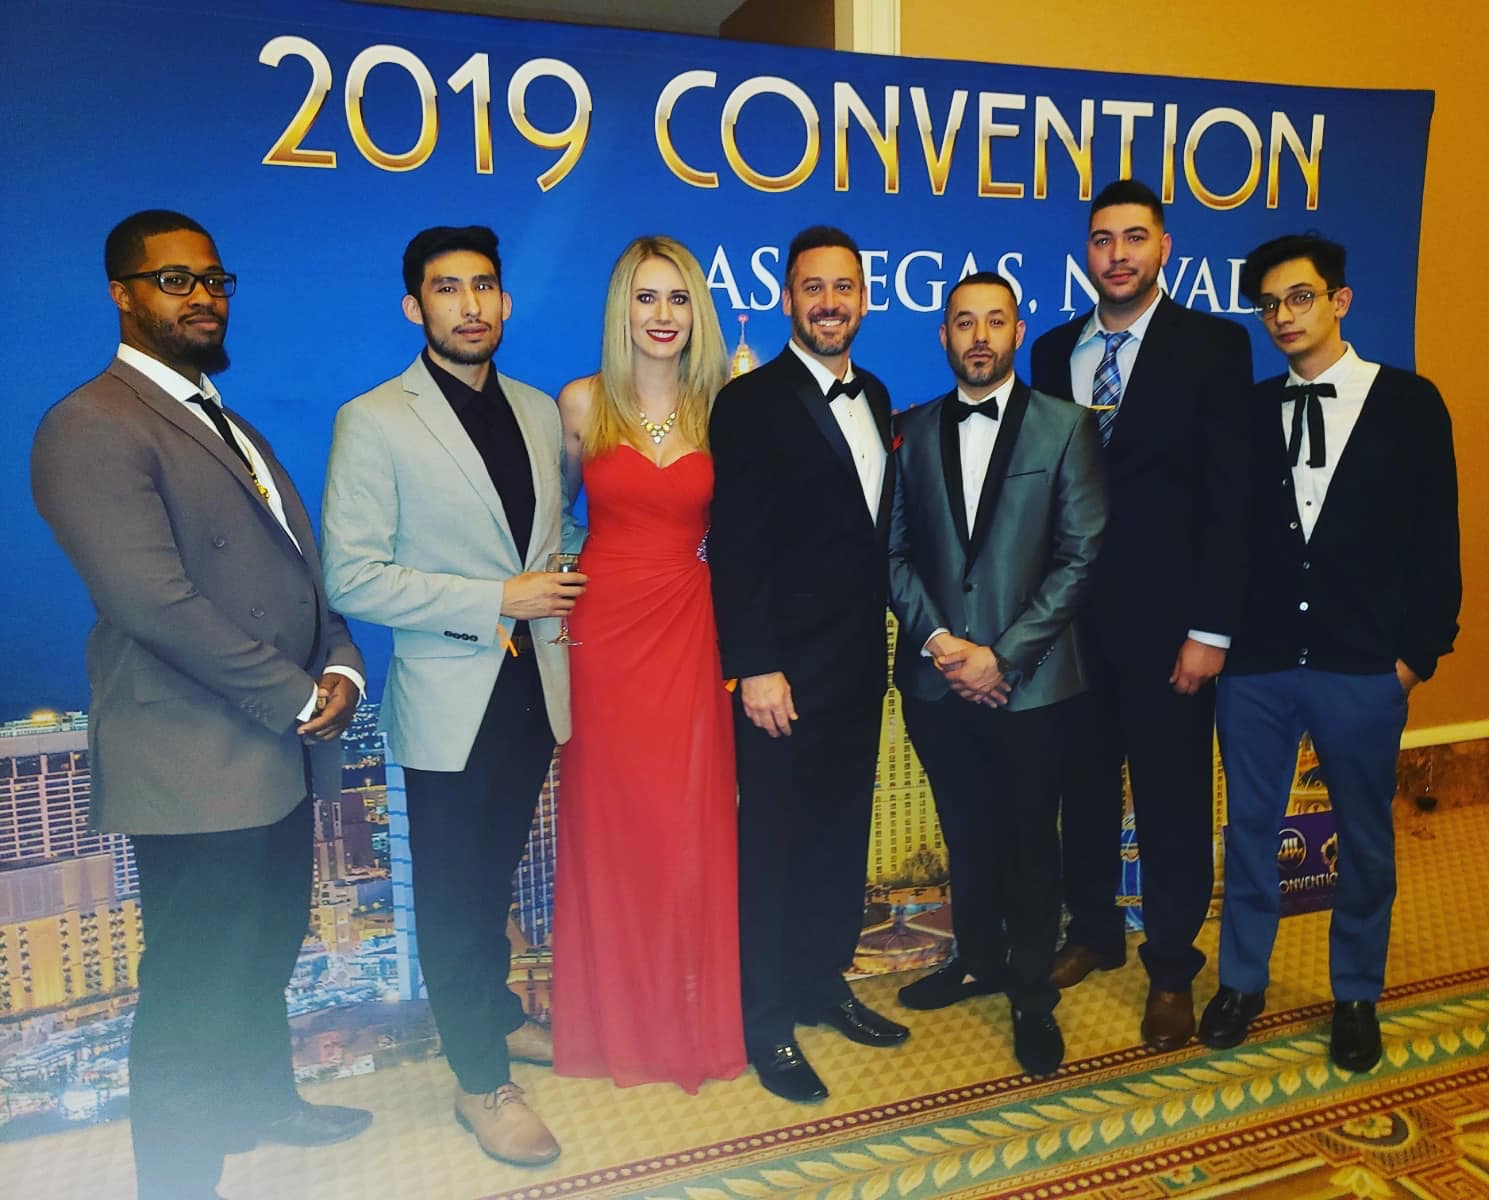 2019 Convention - Energage Pic.jpg